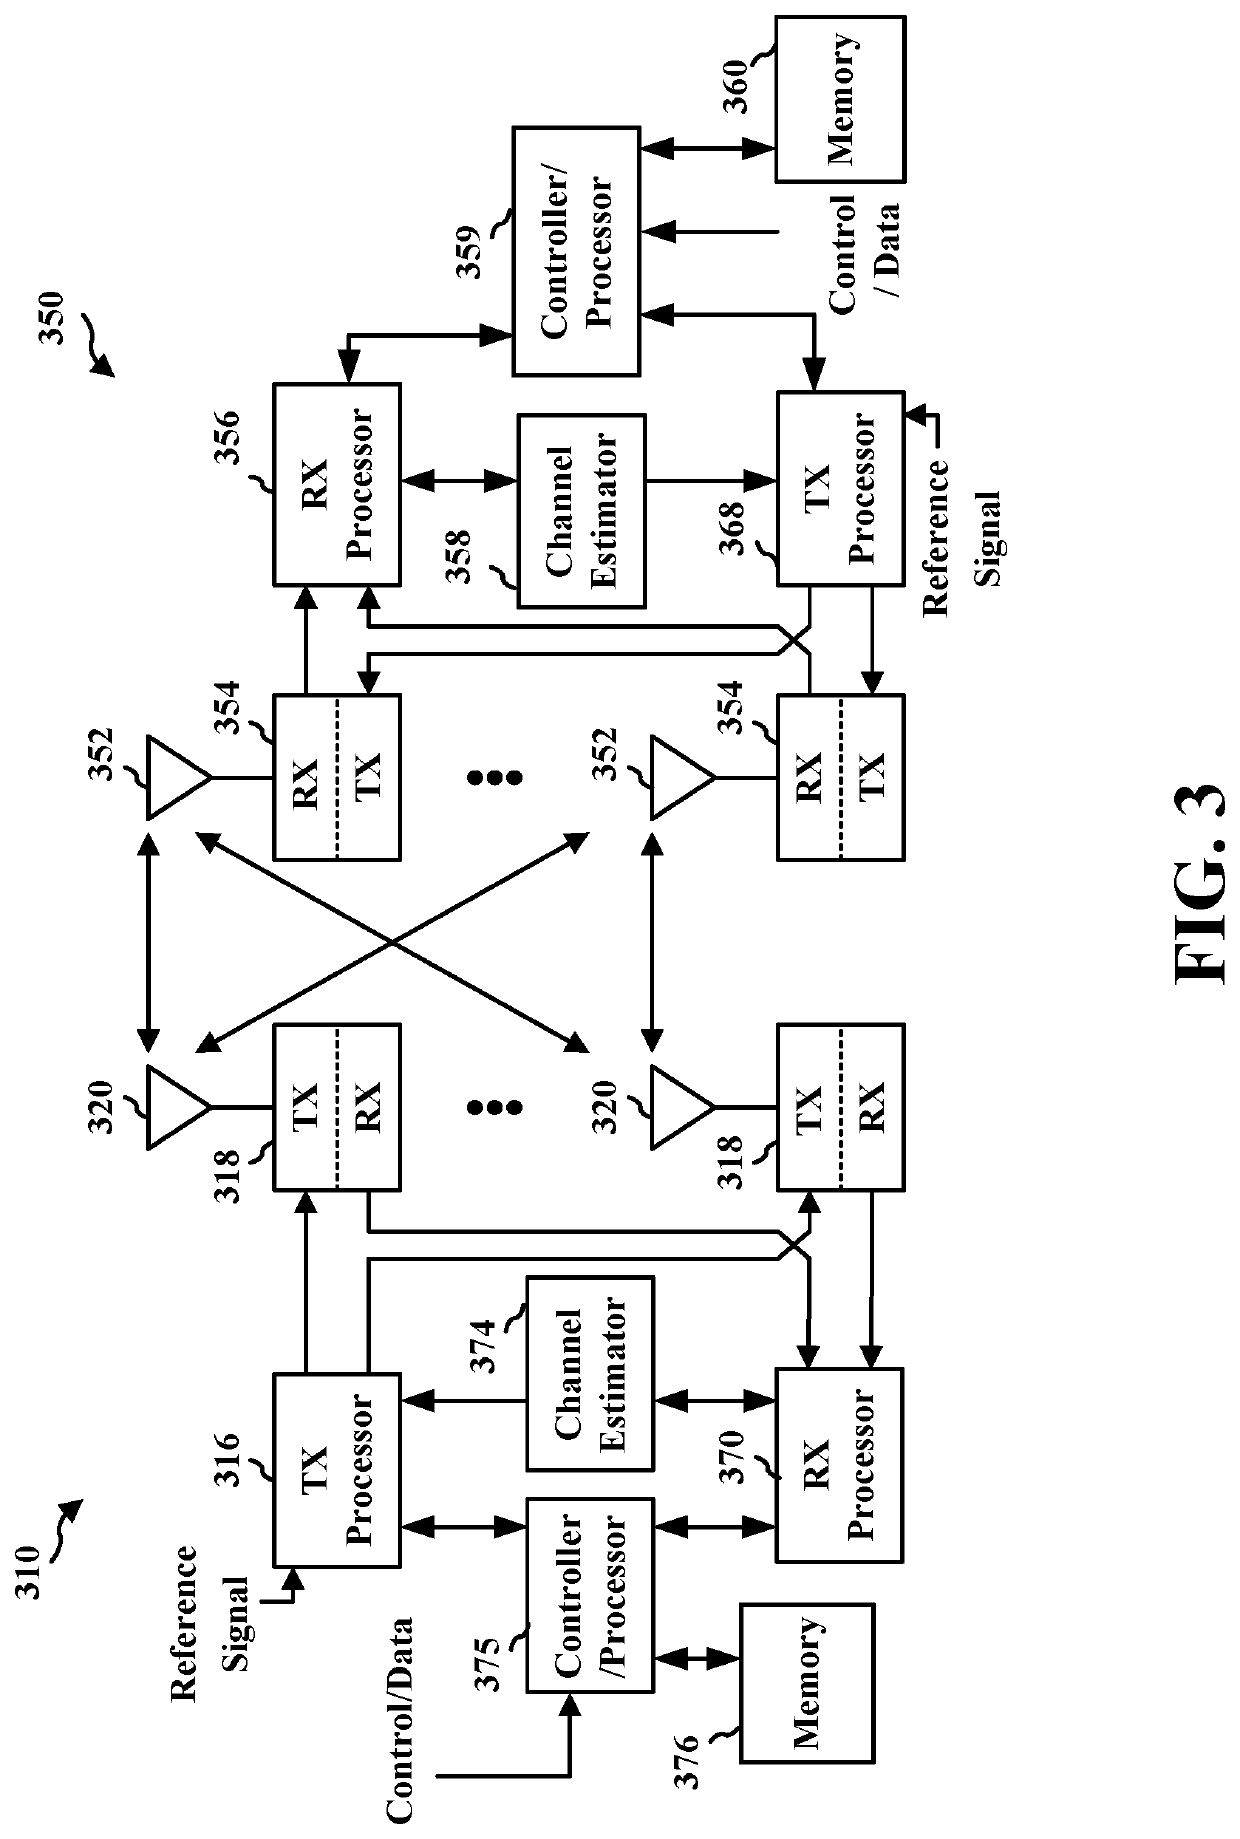 Physical uplink control channel with adaptive demodulation reference signal density